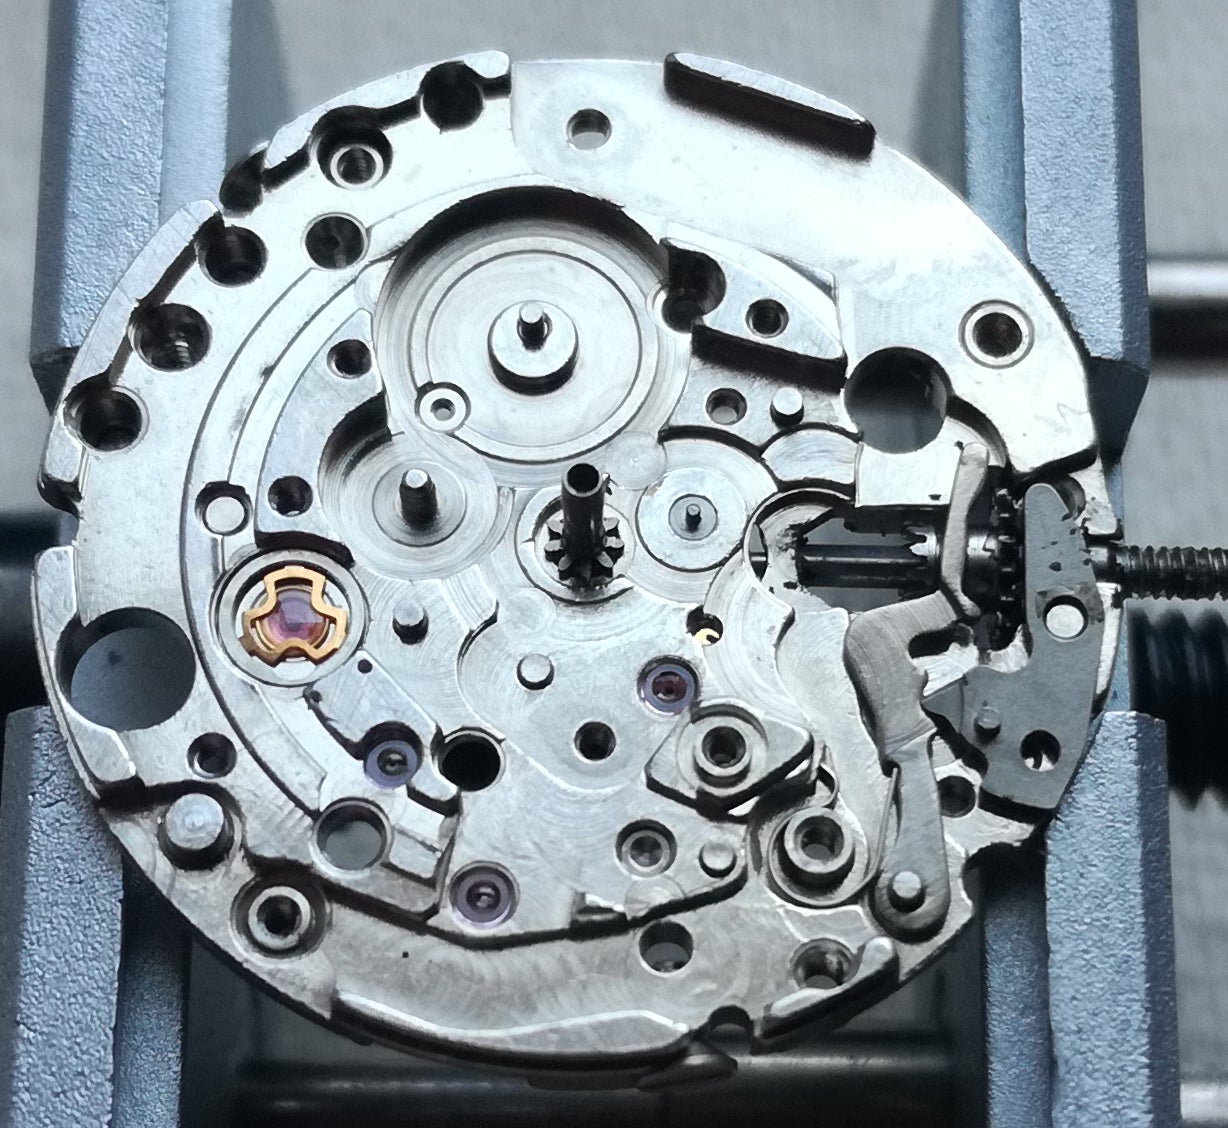 Seiko 2206 repair issues | The Watch Site